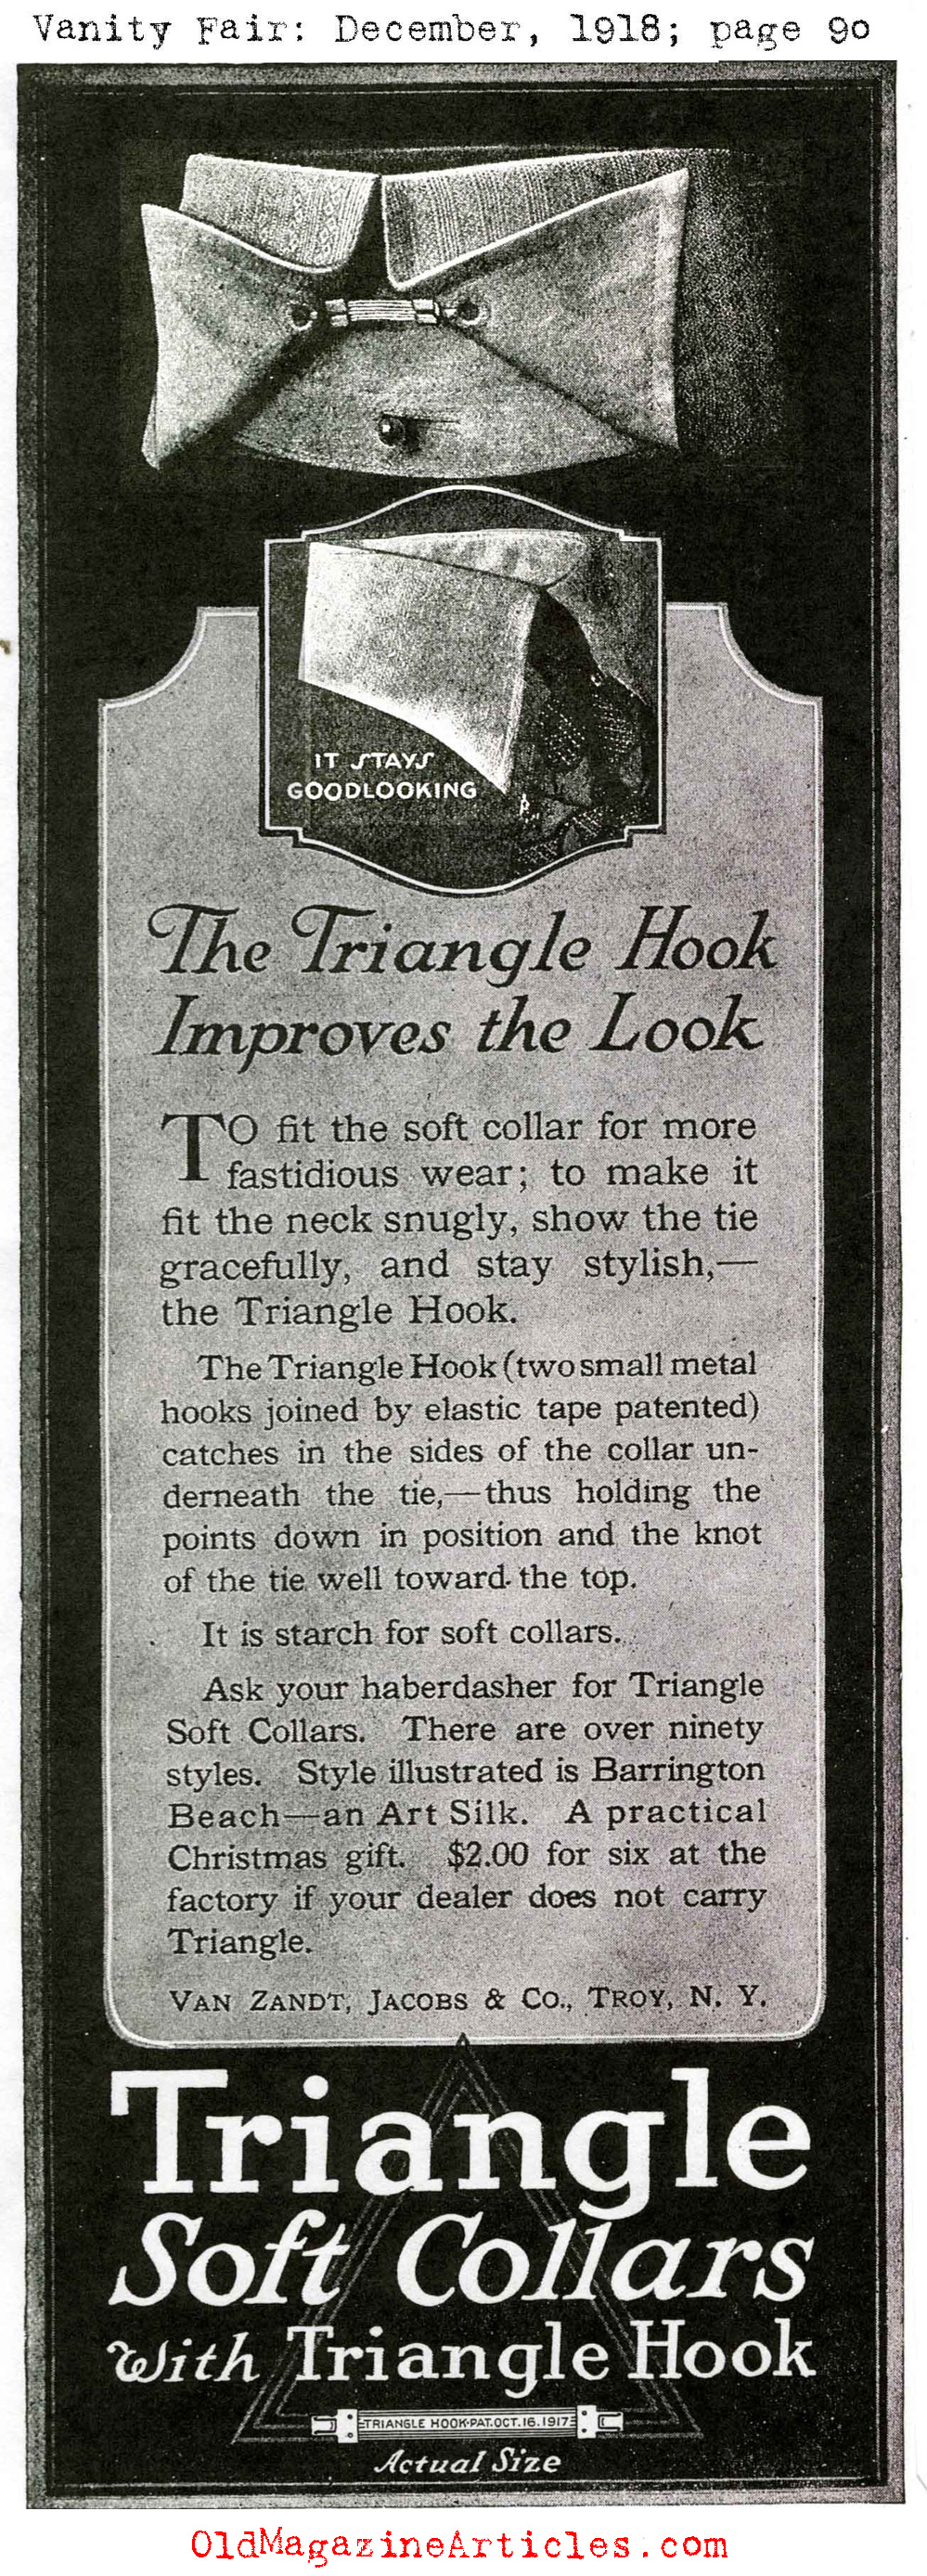 The Collar Accessory That Time Forgot... (Vanity Fair Magazine, 1918)